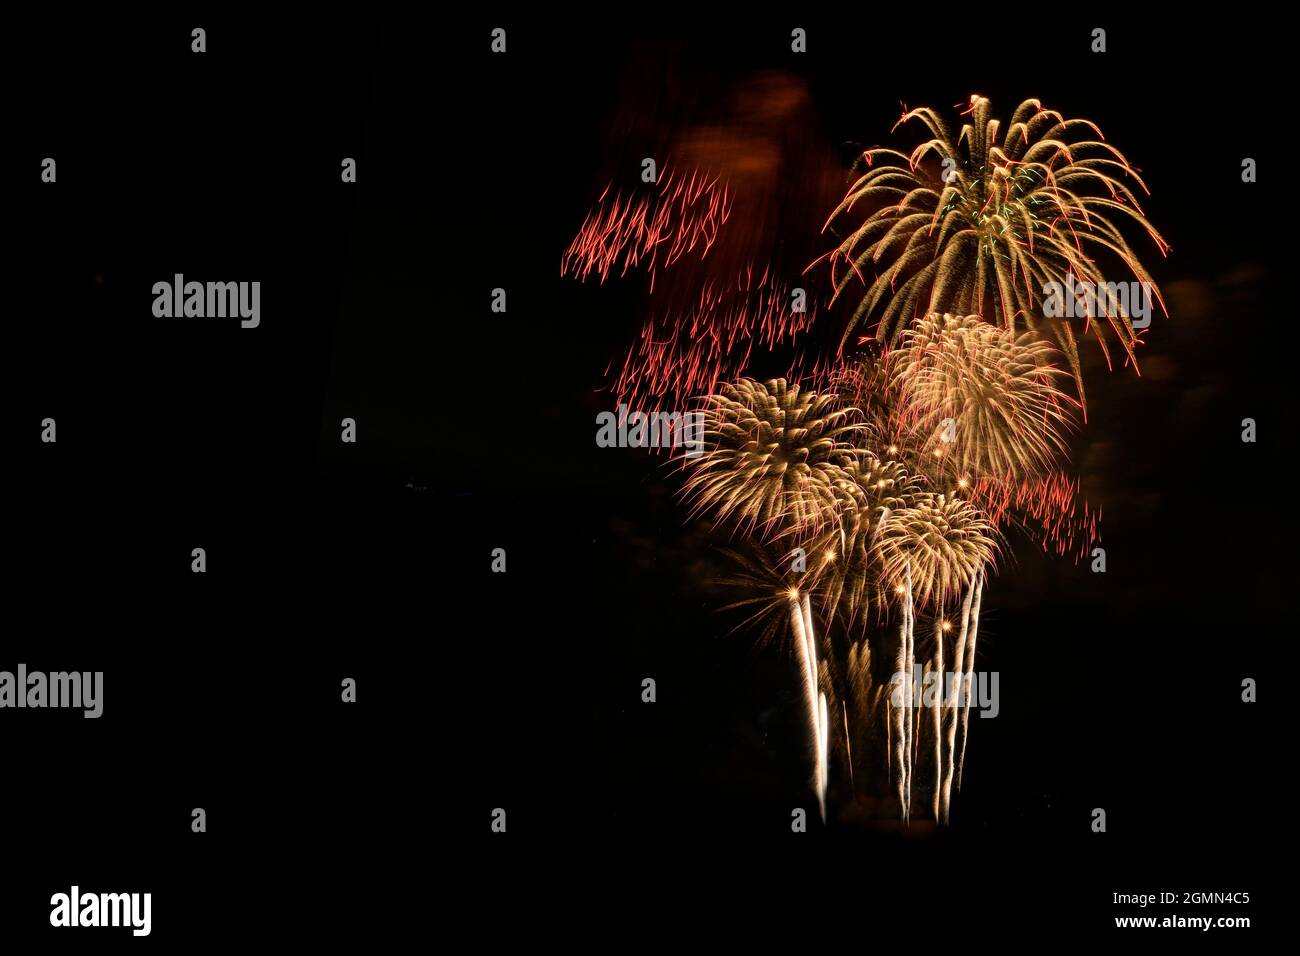 Colorful fireworks celebration and the night sky background. Group of fireworks isolated on black background. Stock Photo